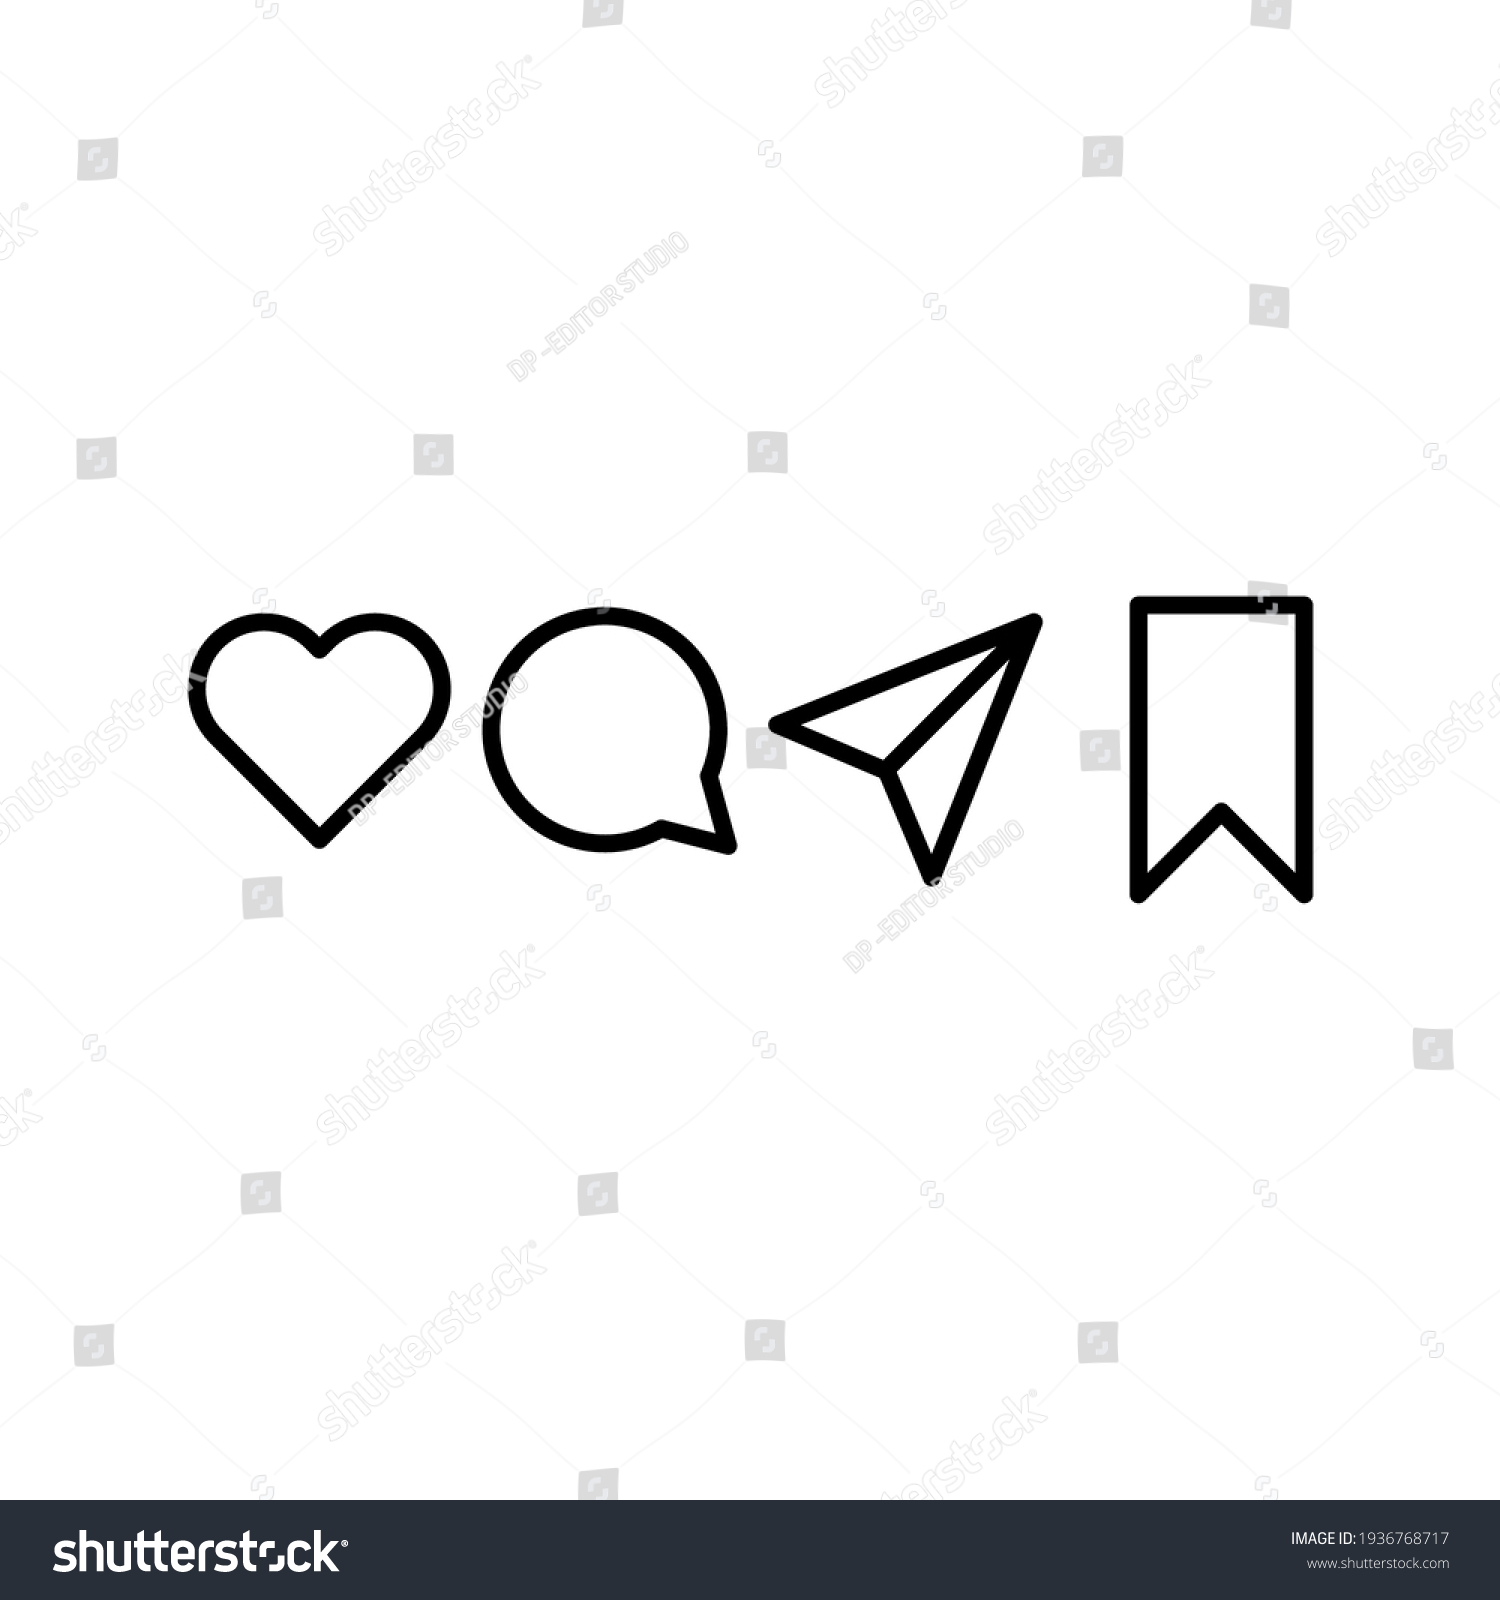 Vector Social Media Like Comment Share Stock Vector (Royalty Free ...